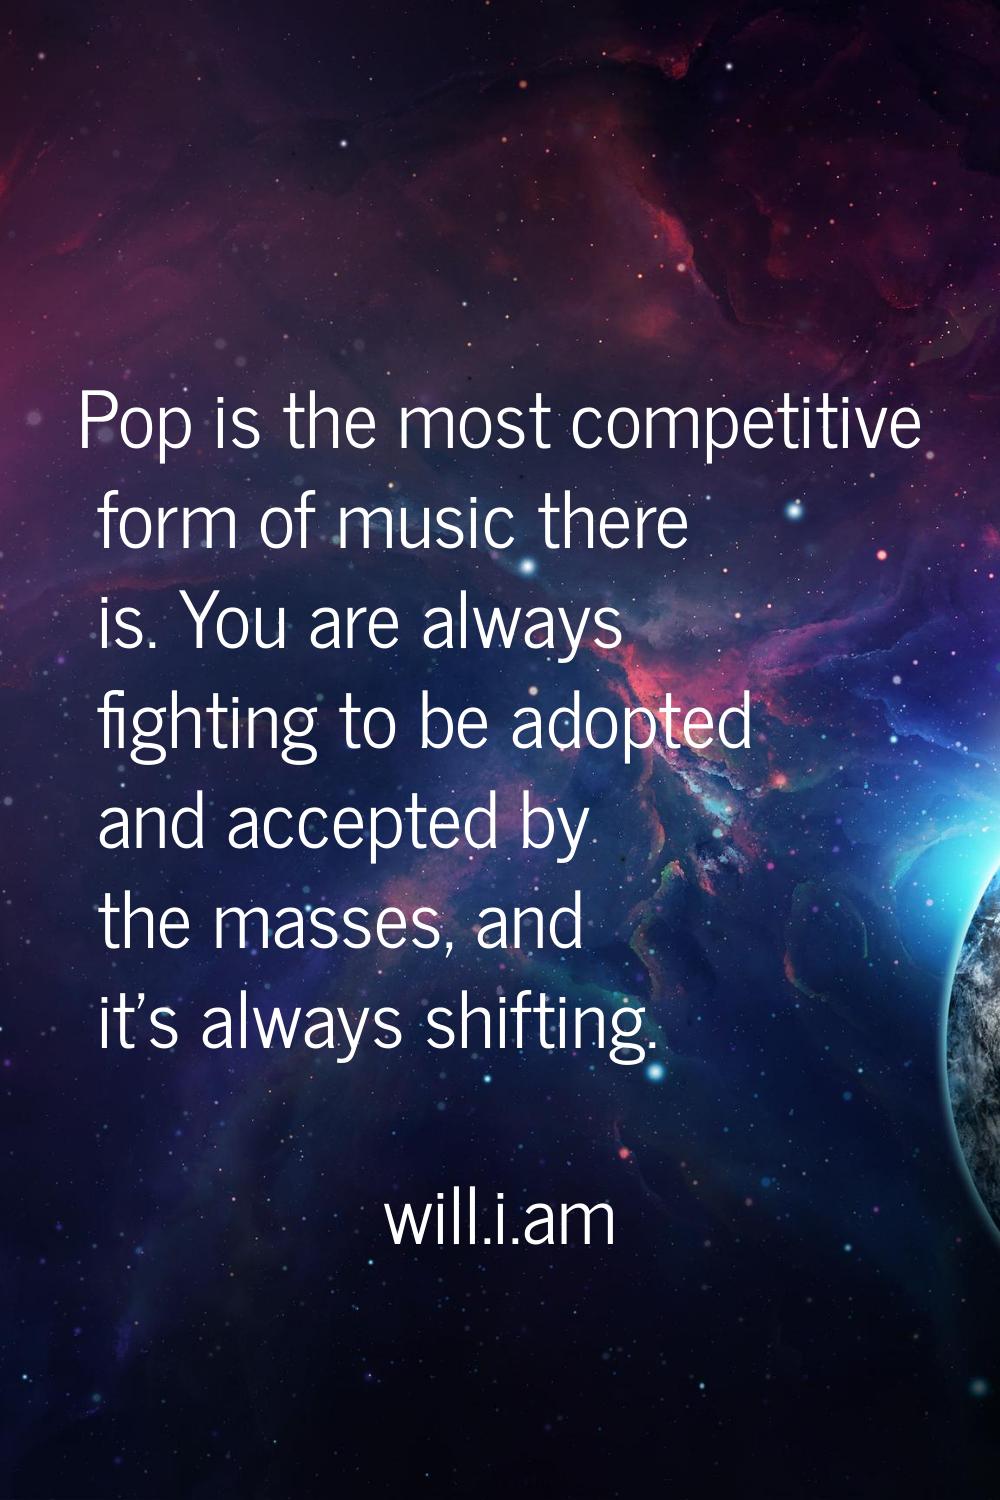 Pop is the most competitive form of music there is. You are always fighting to be adopted and accep